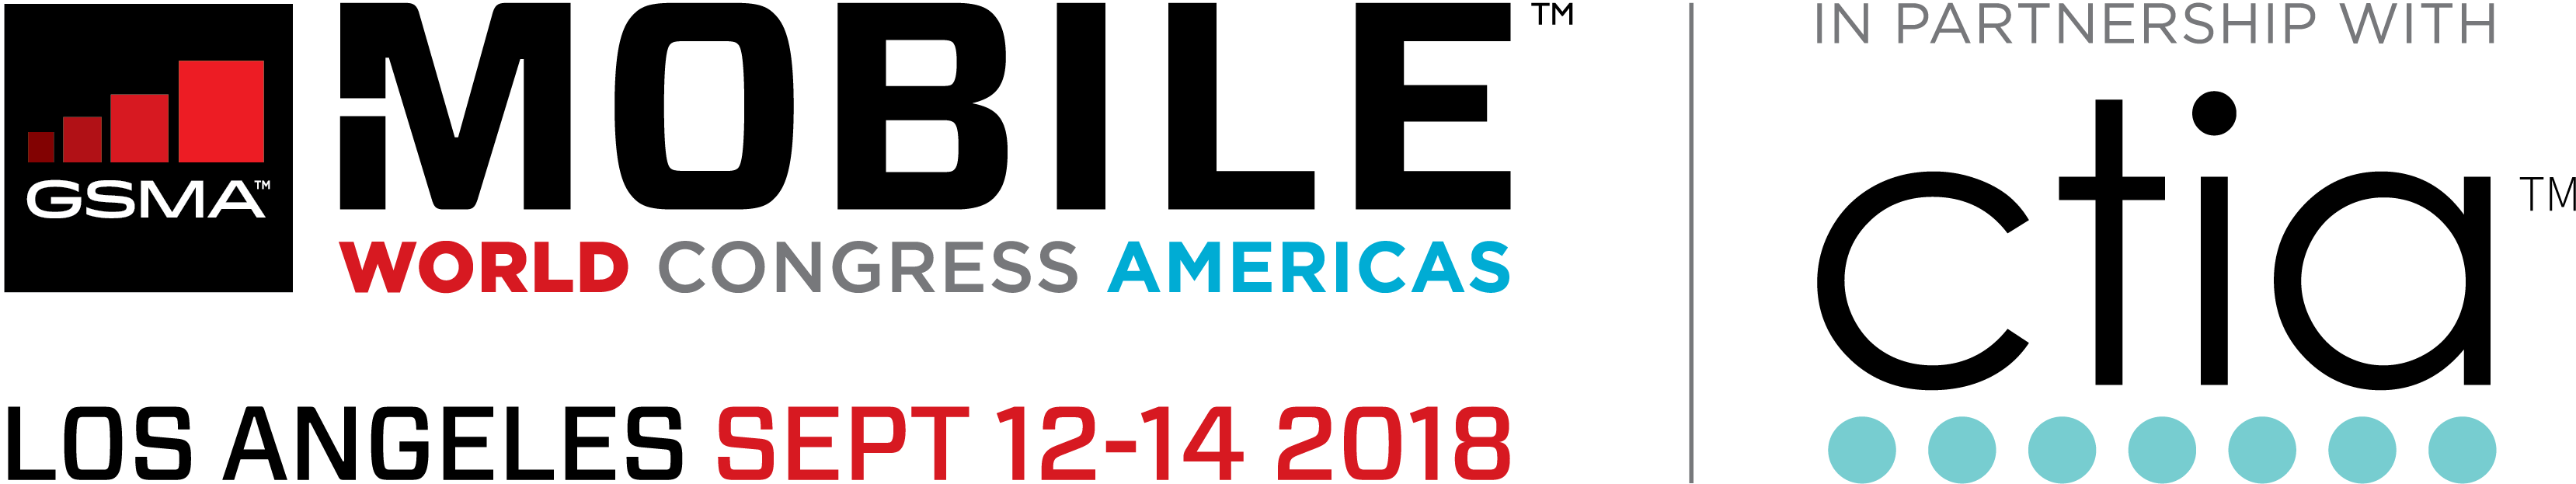 Don't Miss These MWC Americas talks